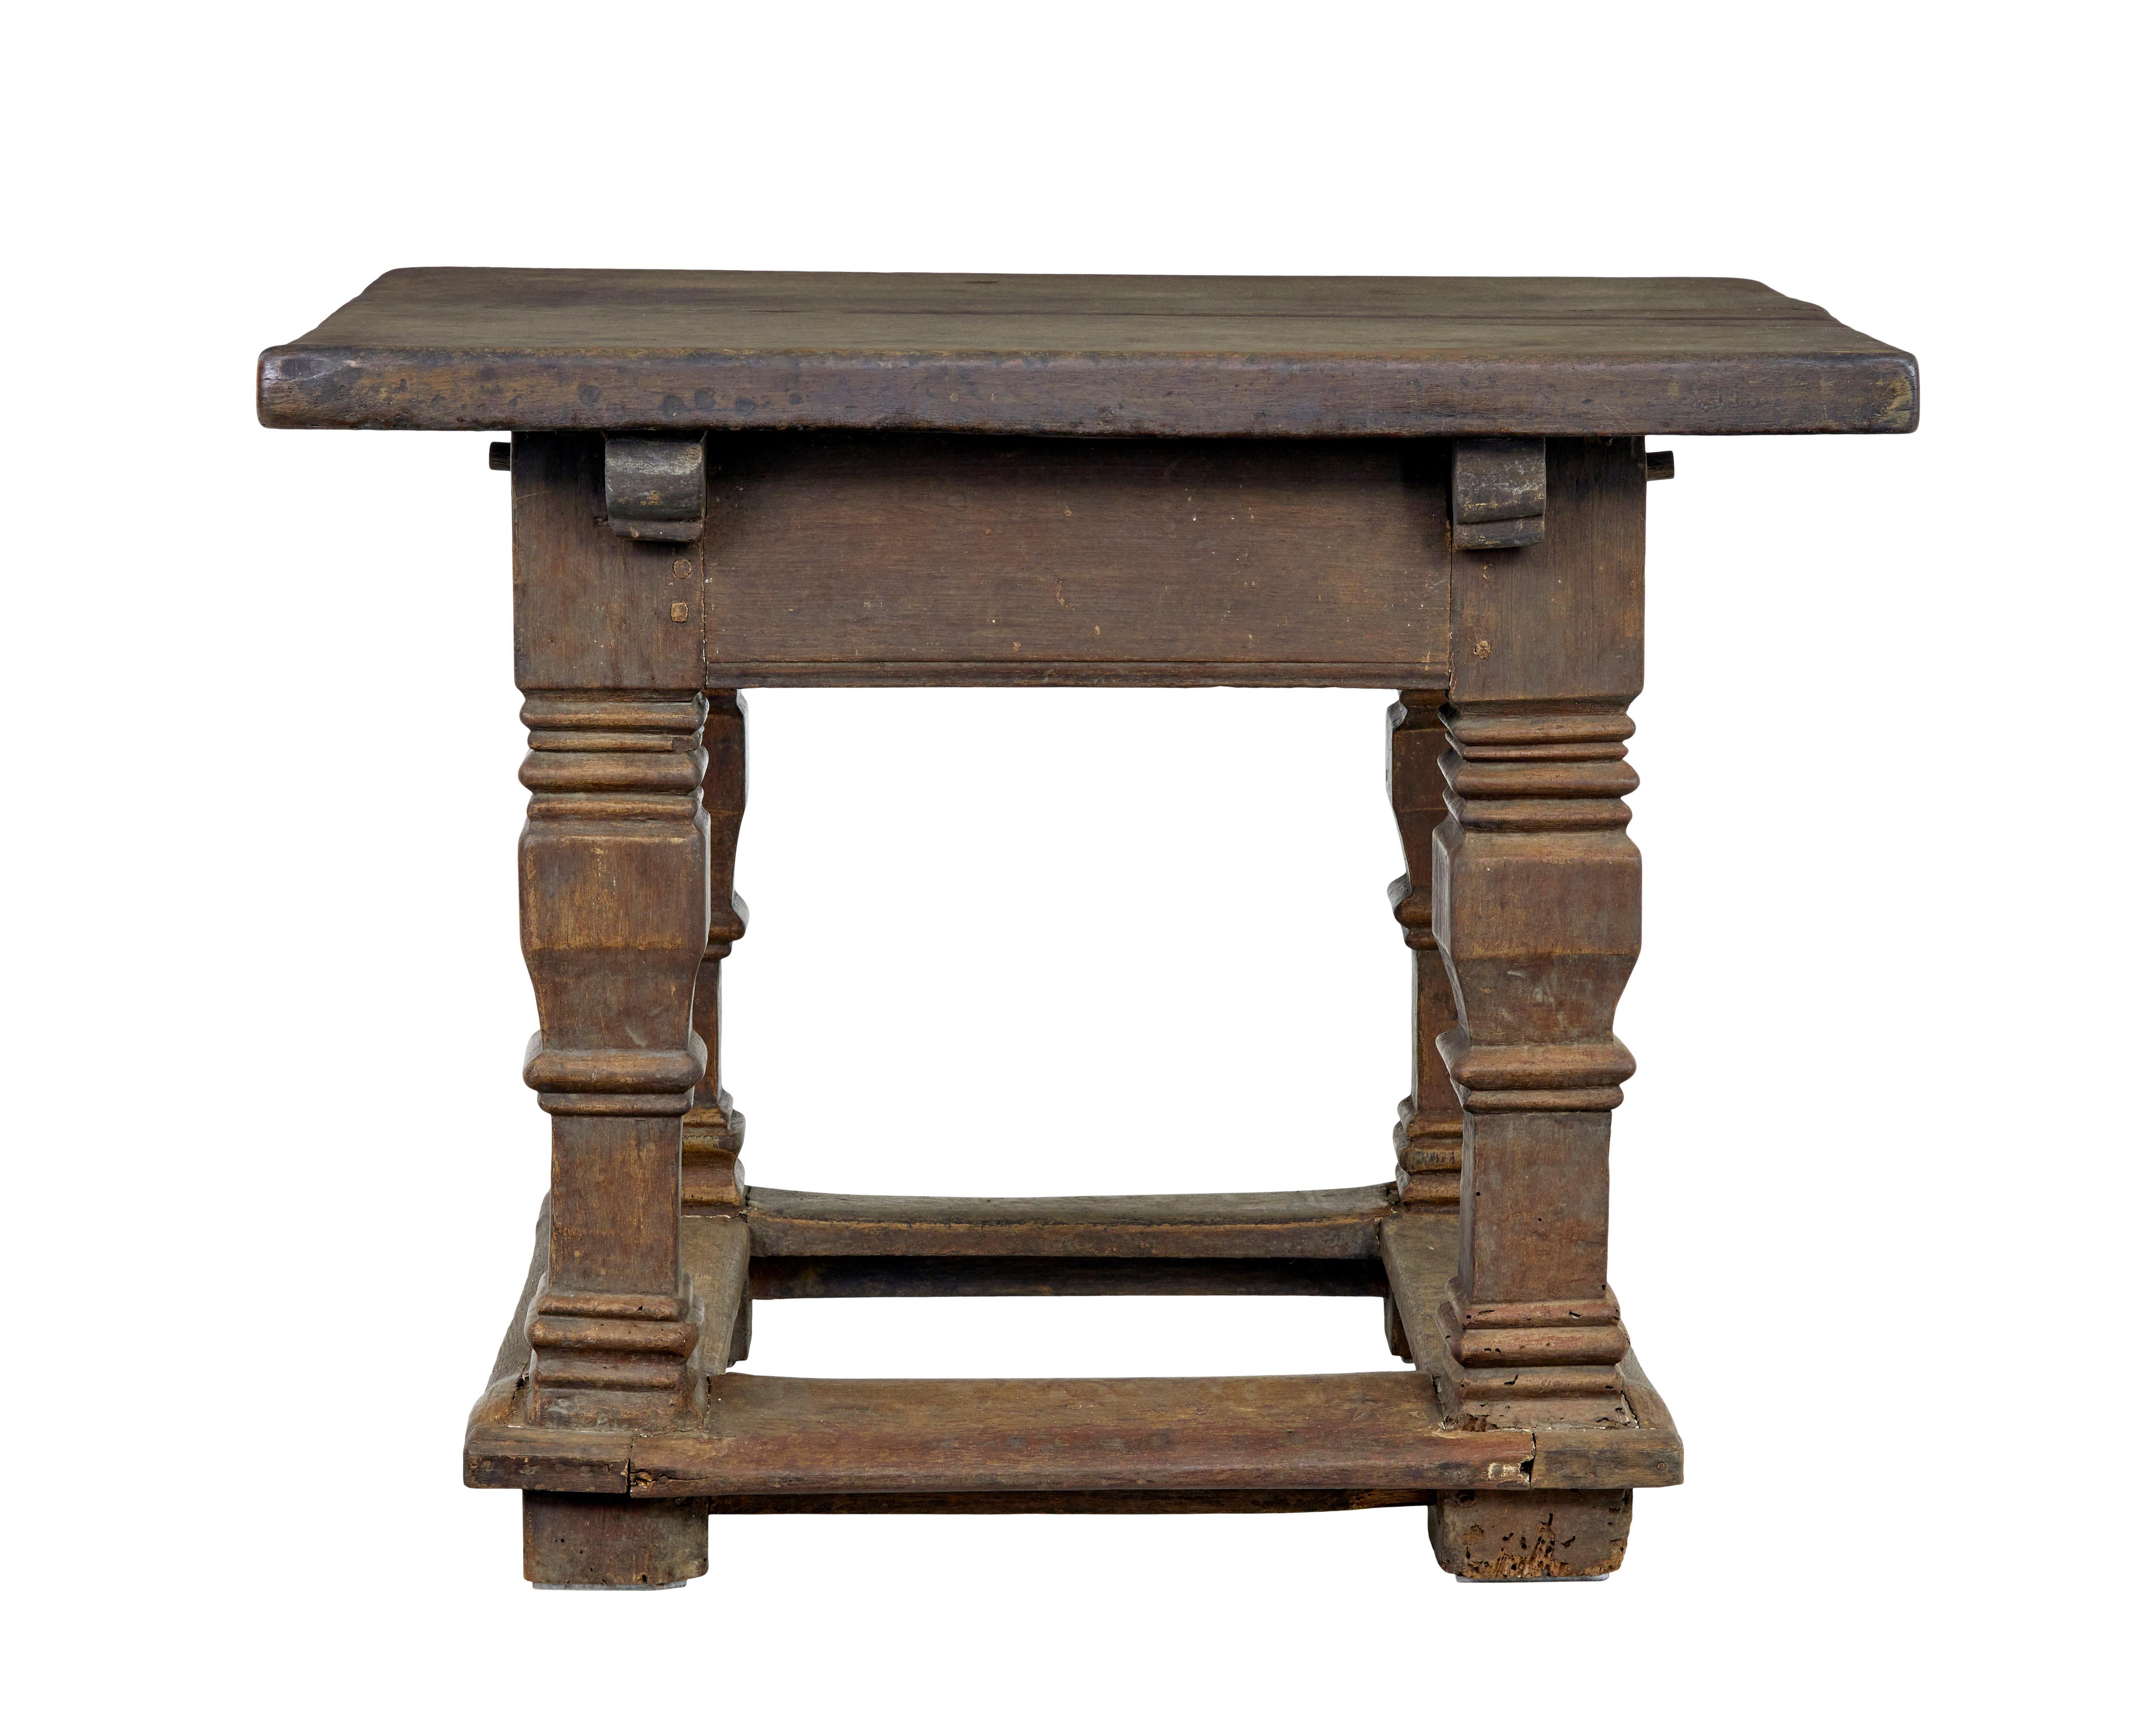 Flemish 17th Century carved oak table For Sale 3